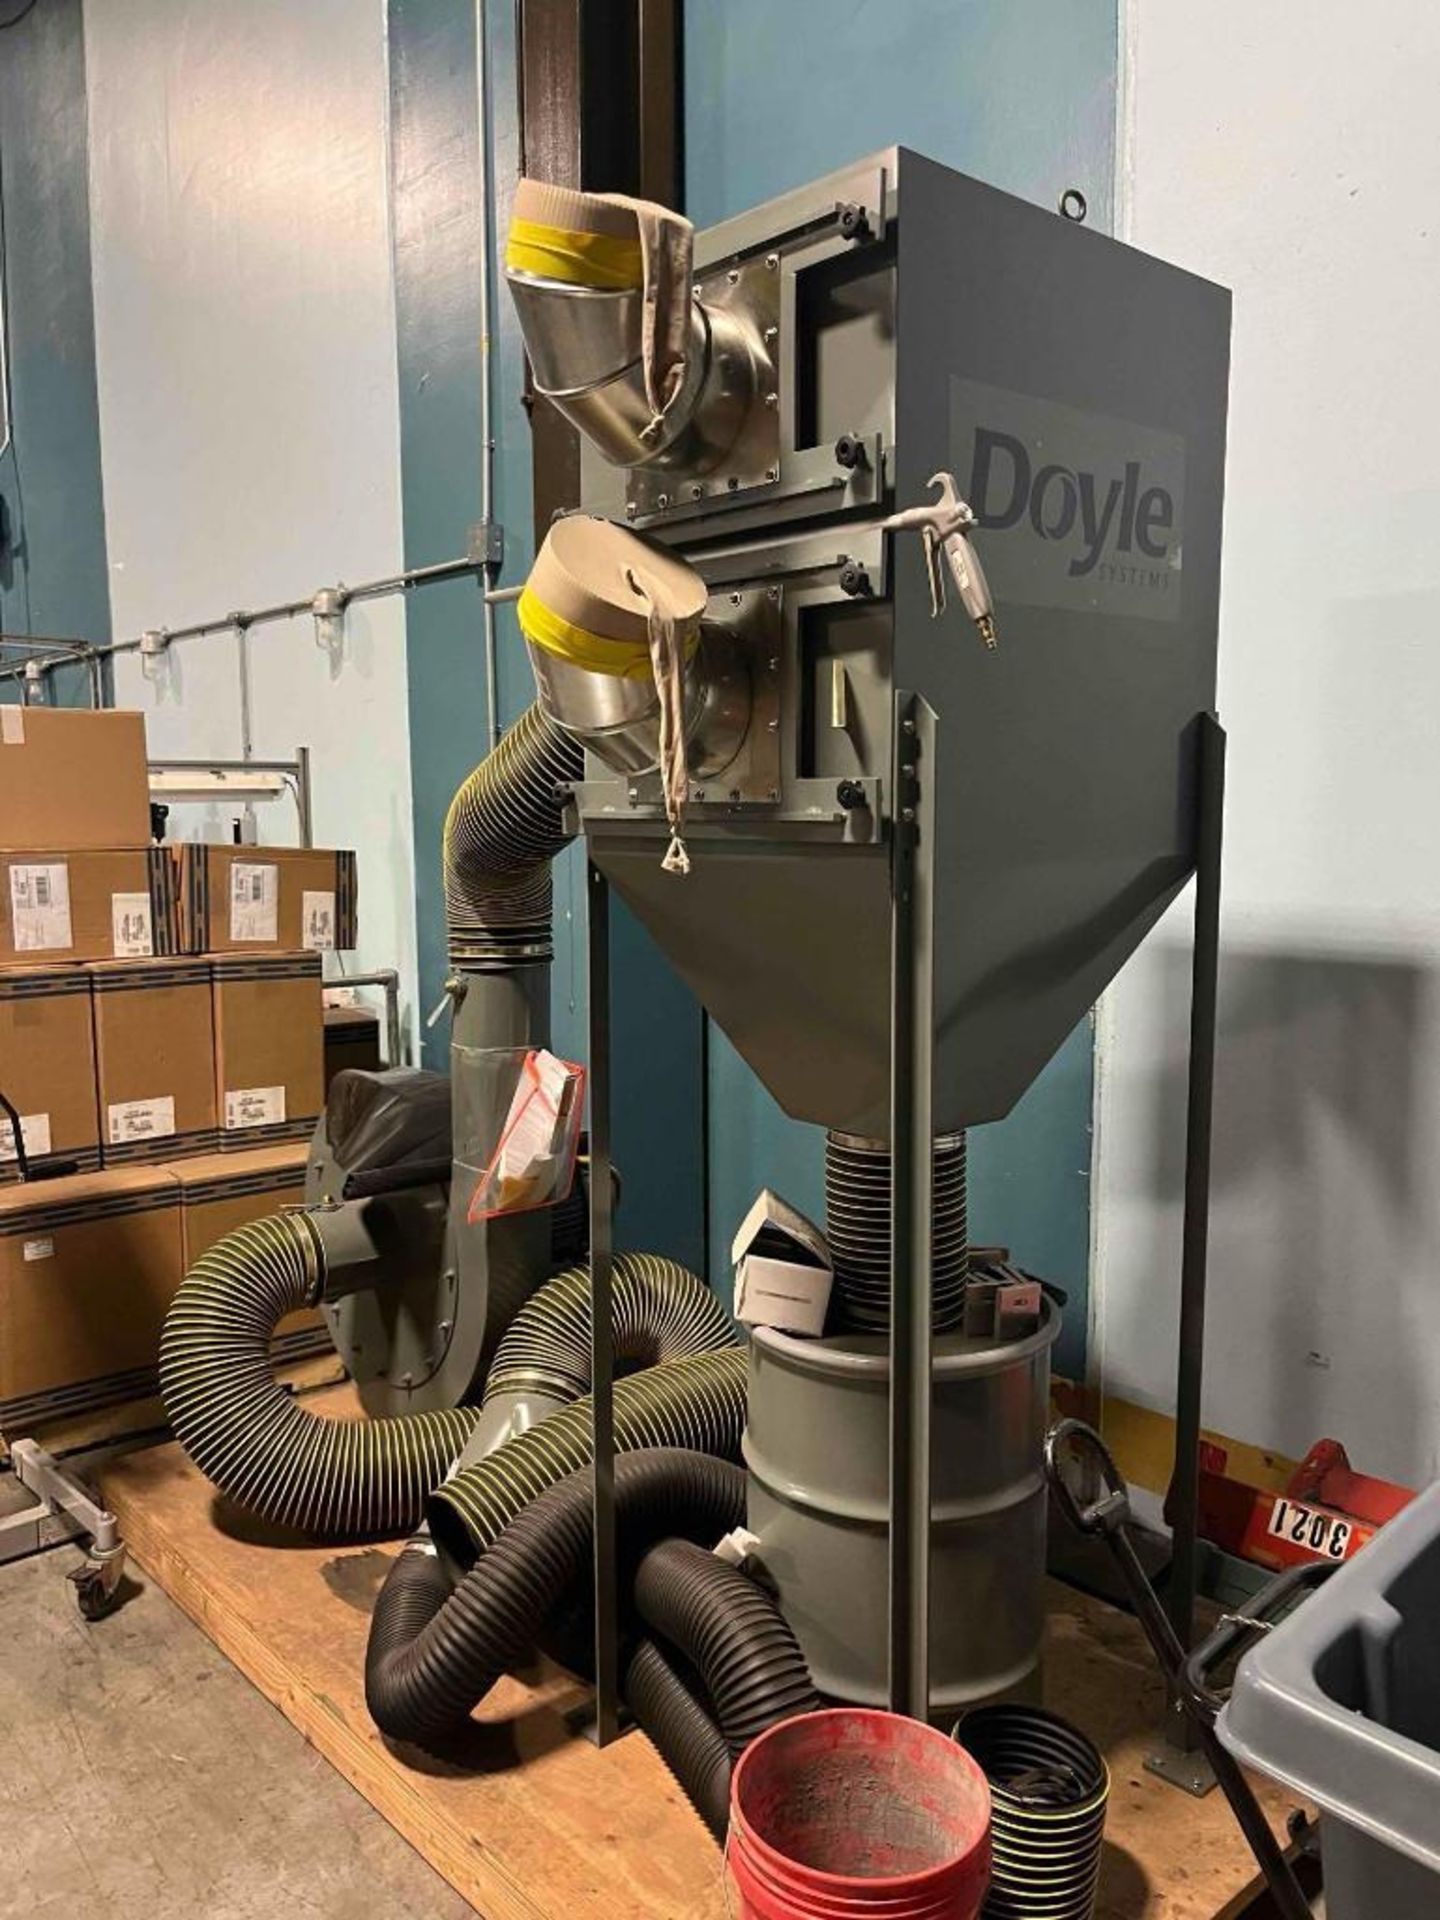 Doyle 2-Cartridge Dust Collector - Never Used (2017)